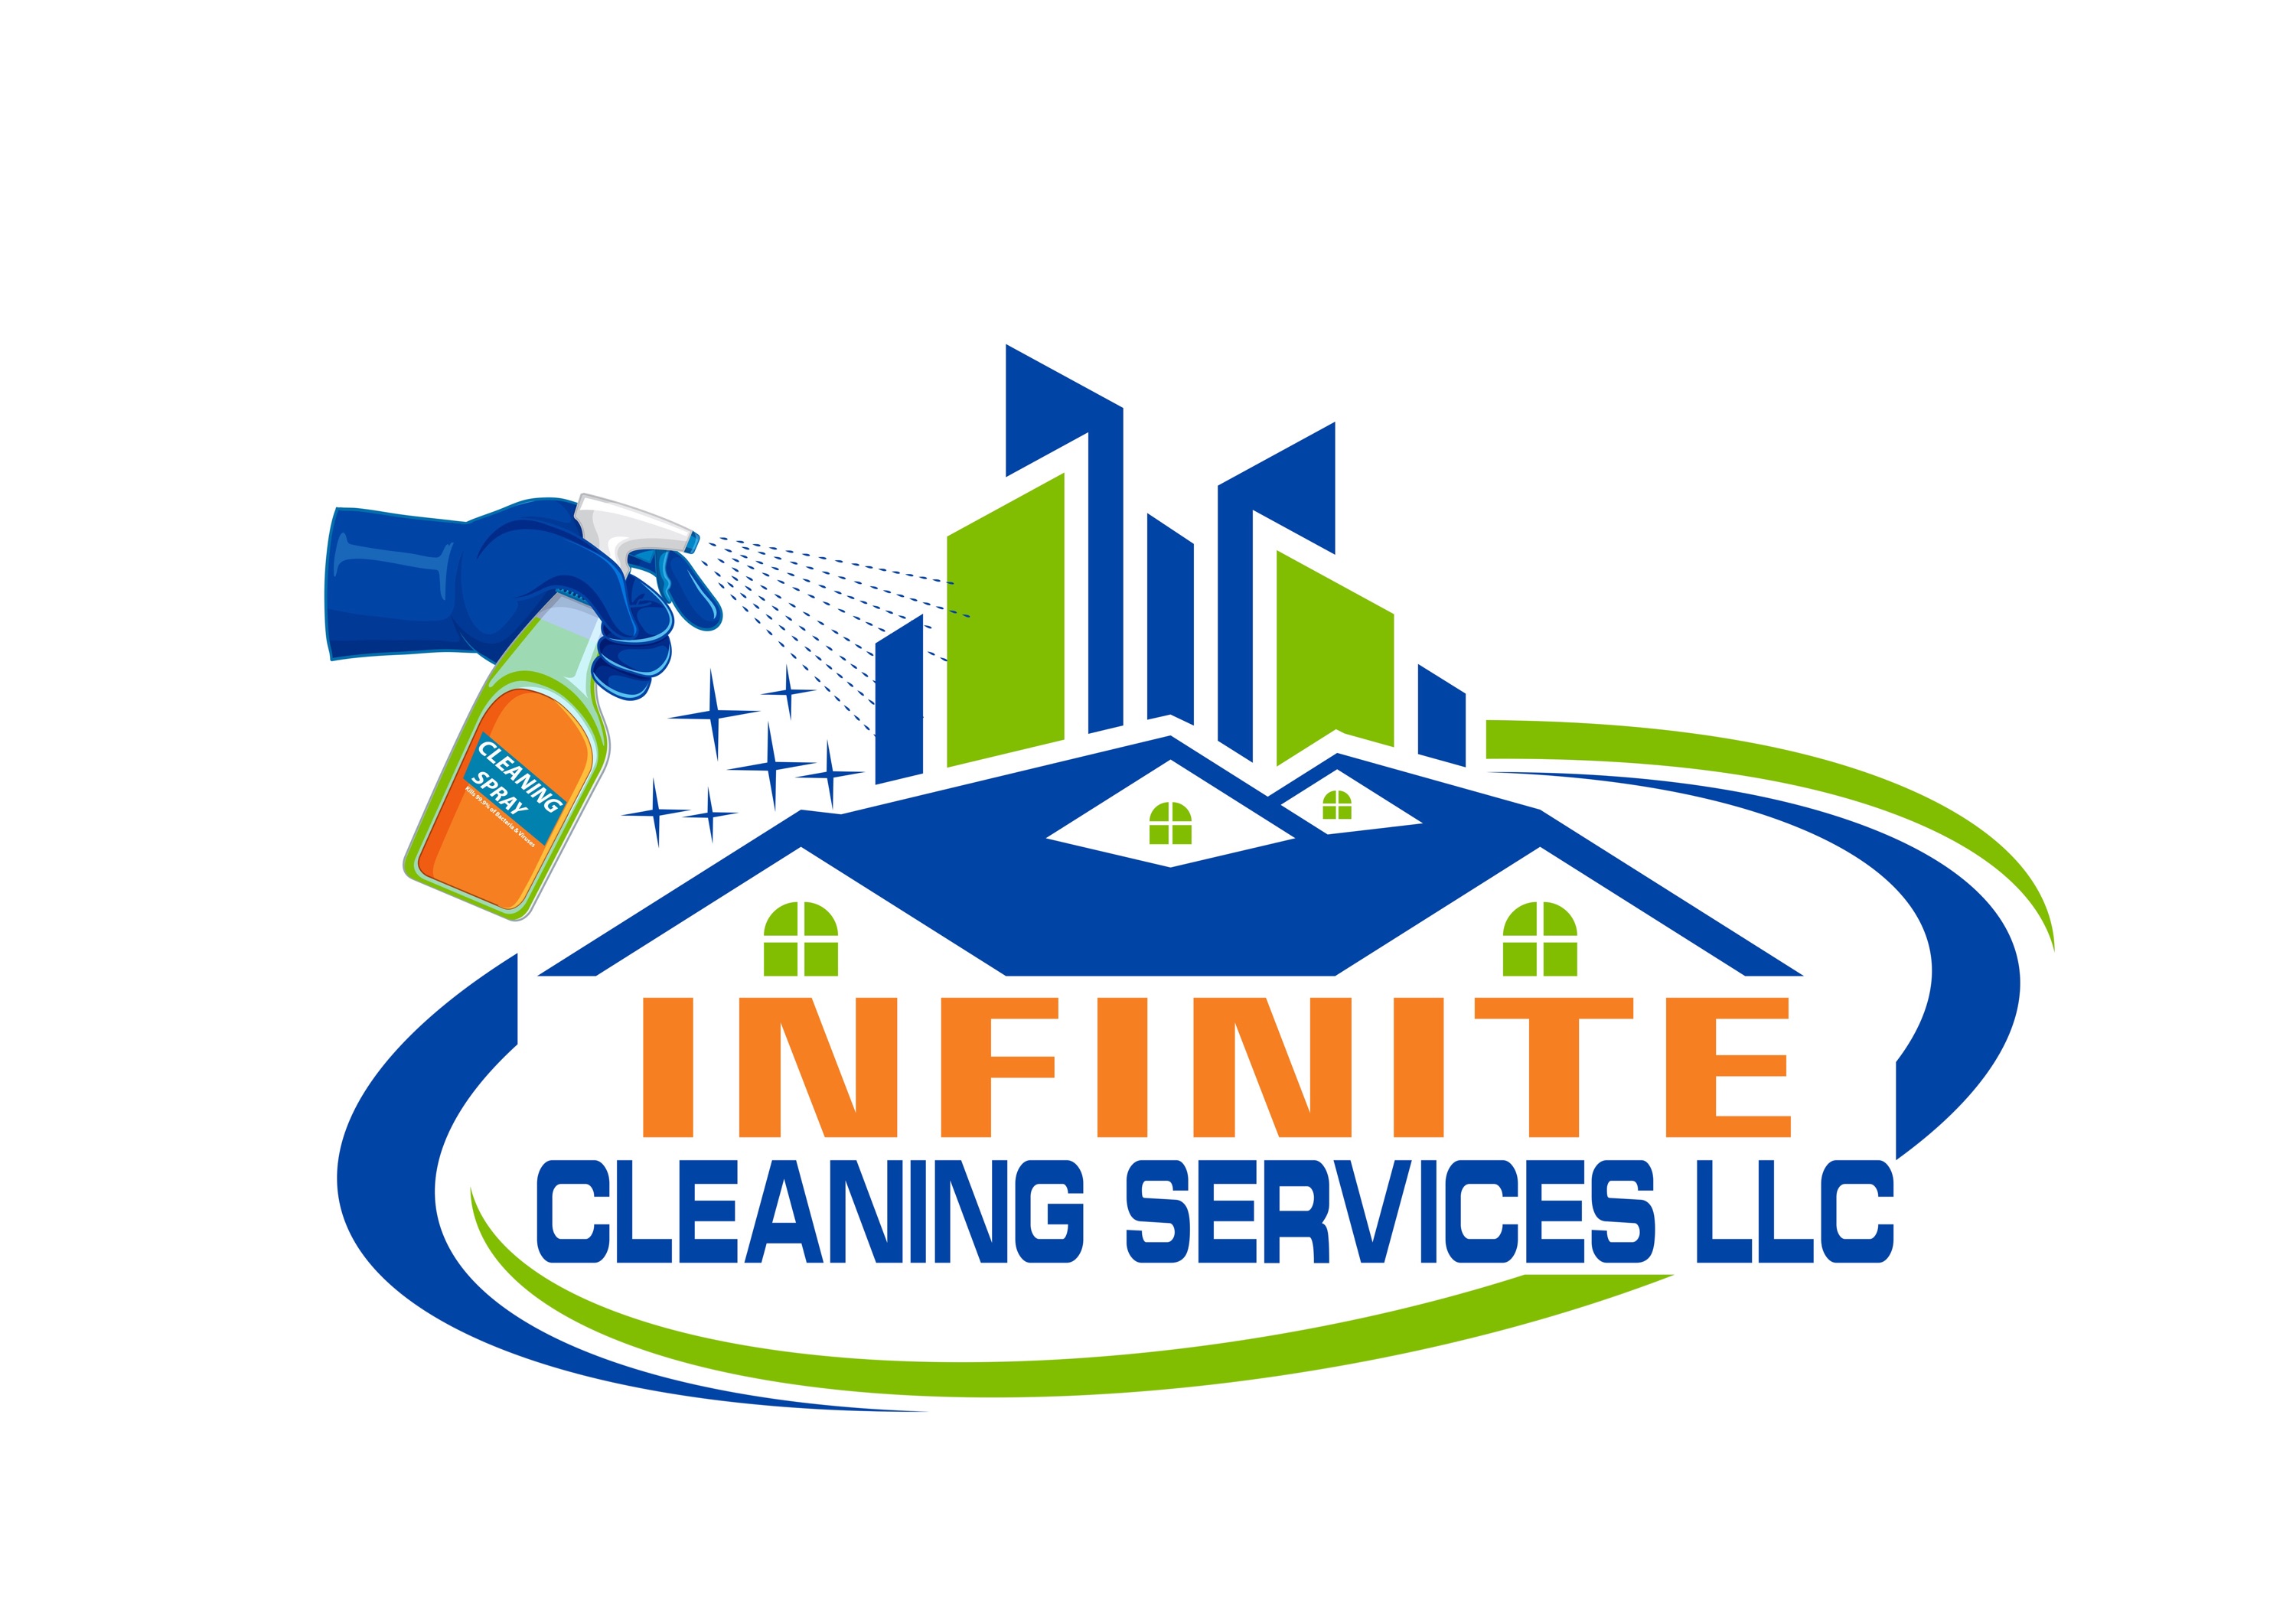 Infinite Cleaning Services LLC Logo